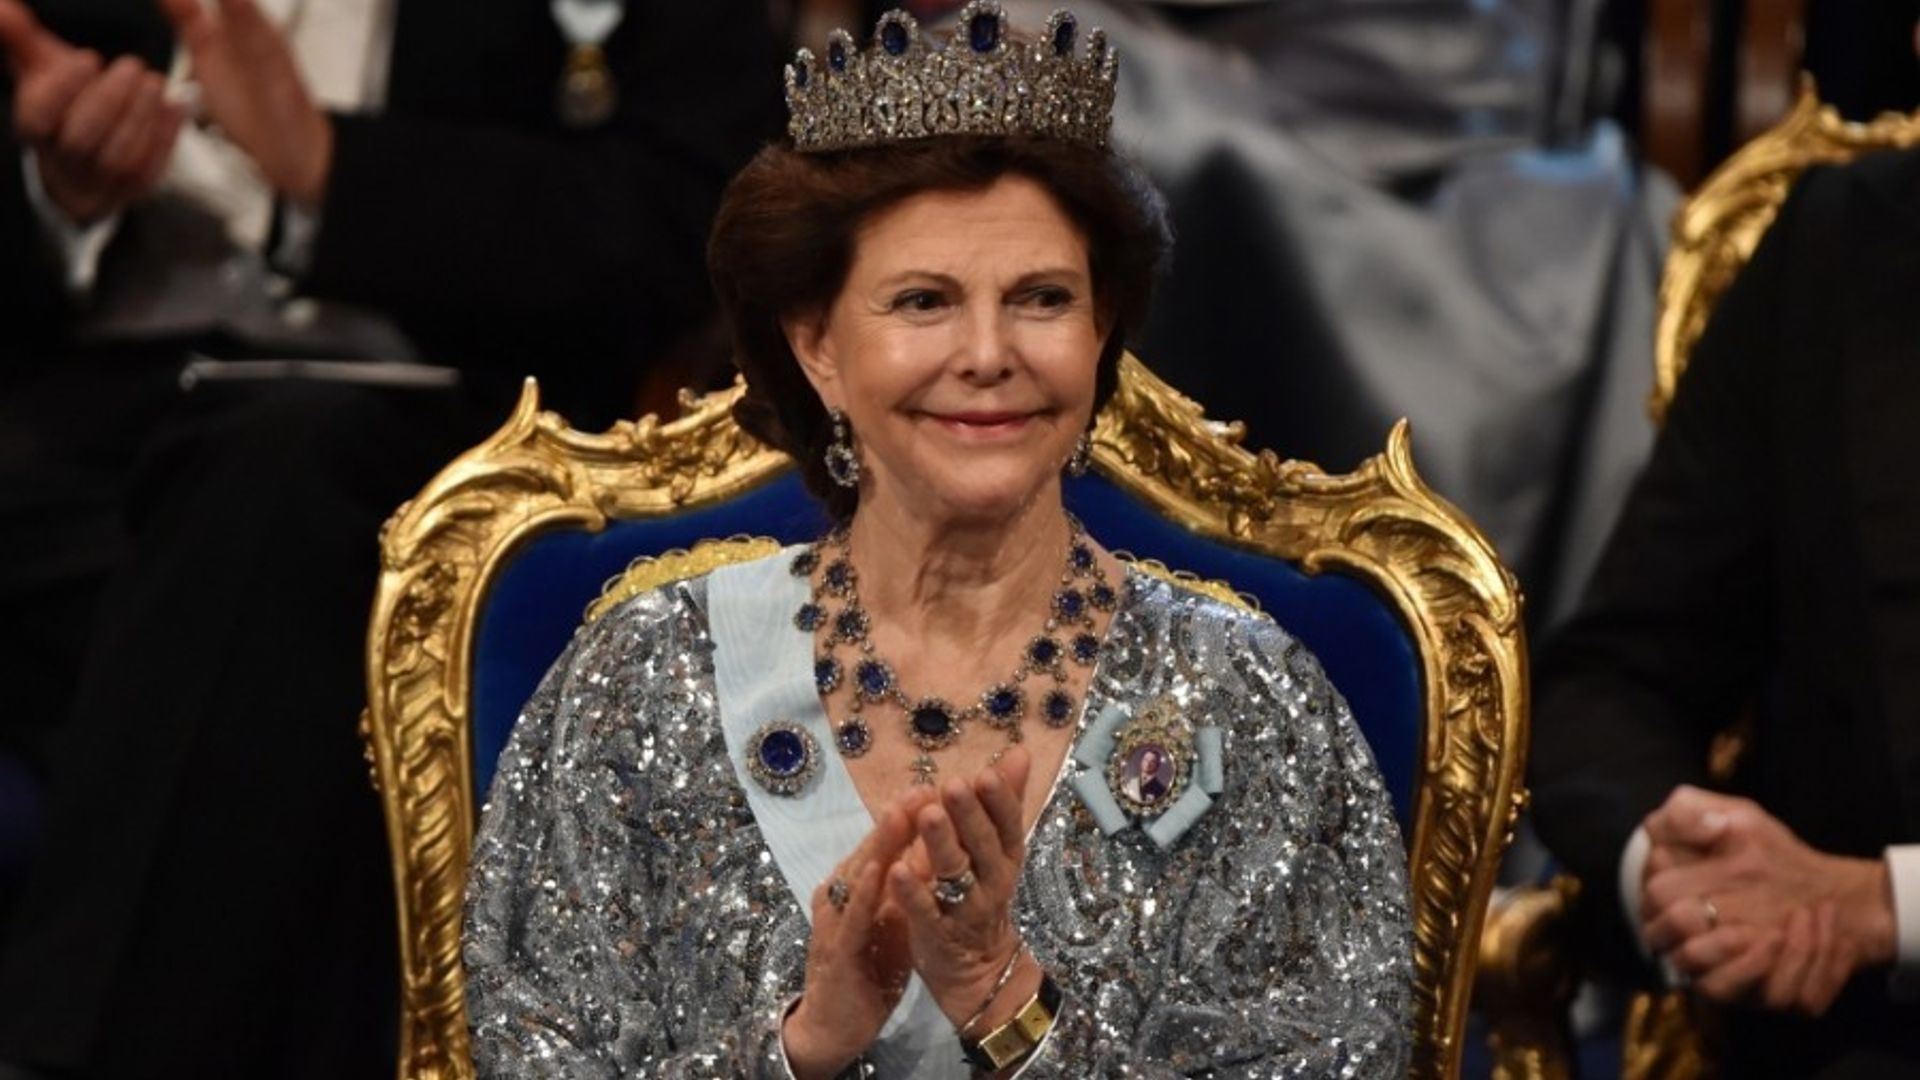 Queen Silvia hospitalized and hopes to be home for Christmas